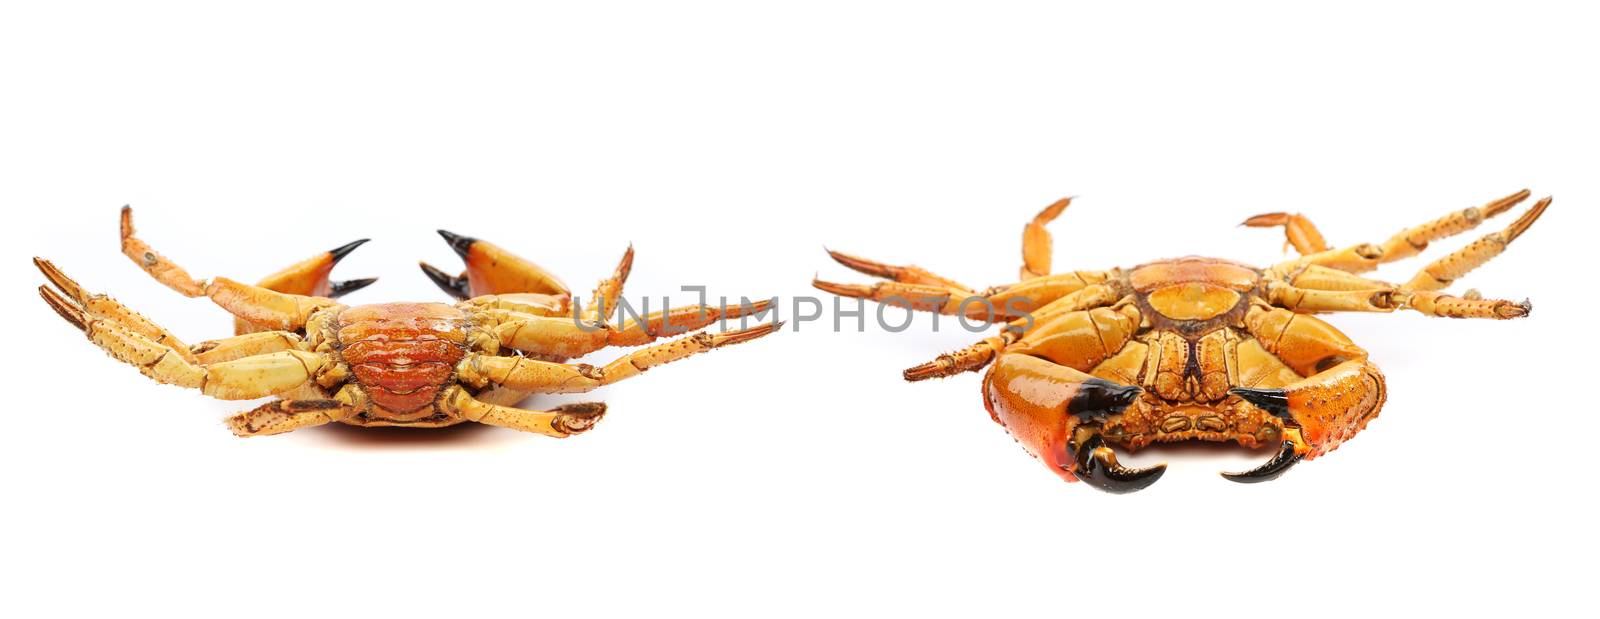 Two seafood red crabs isolated on a white background